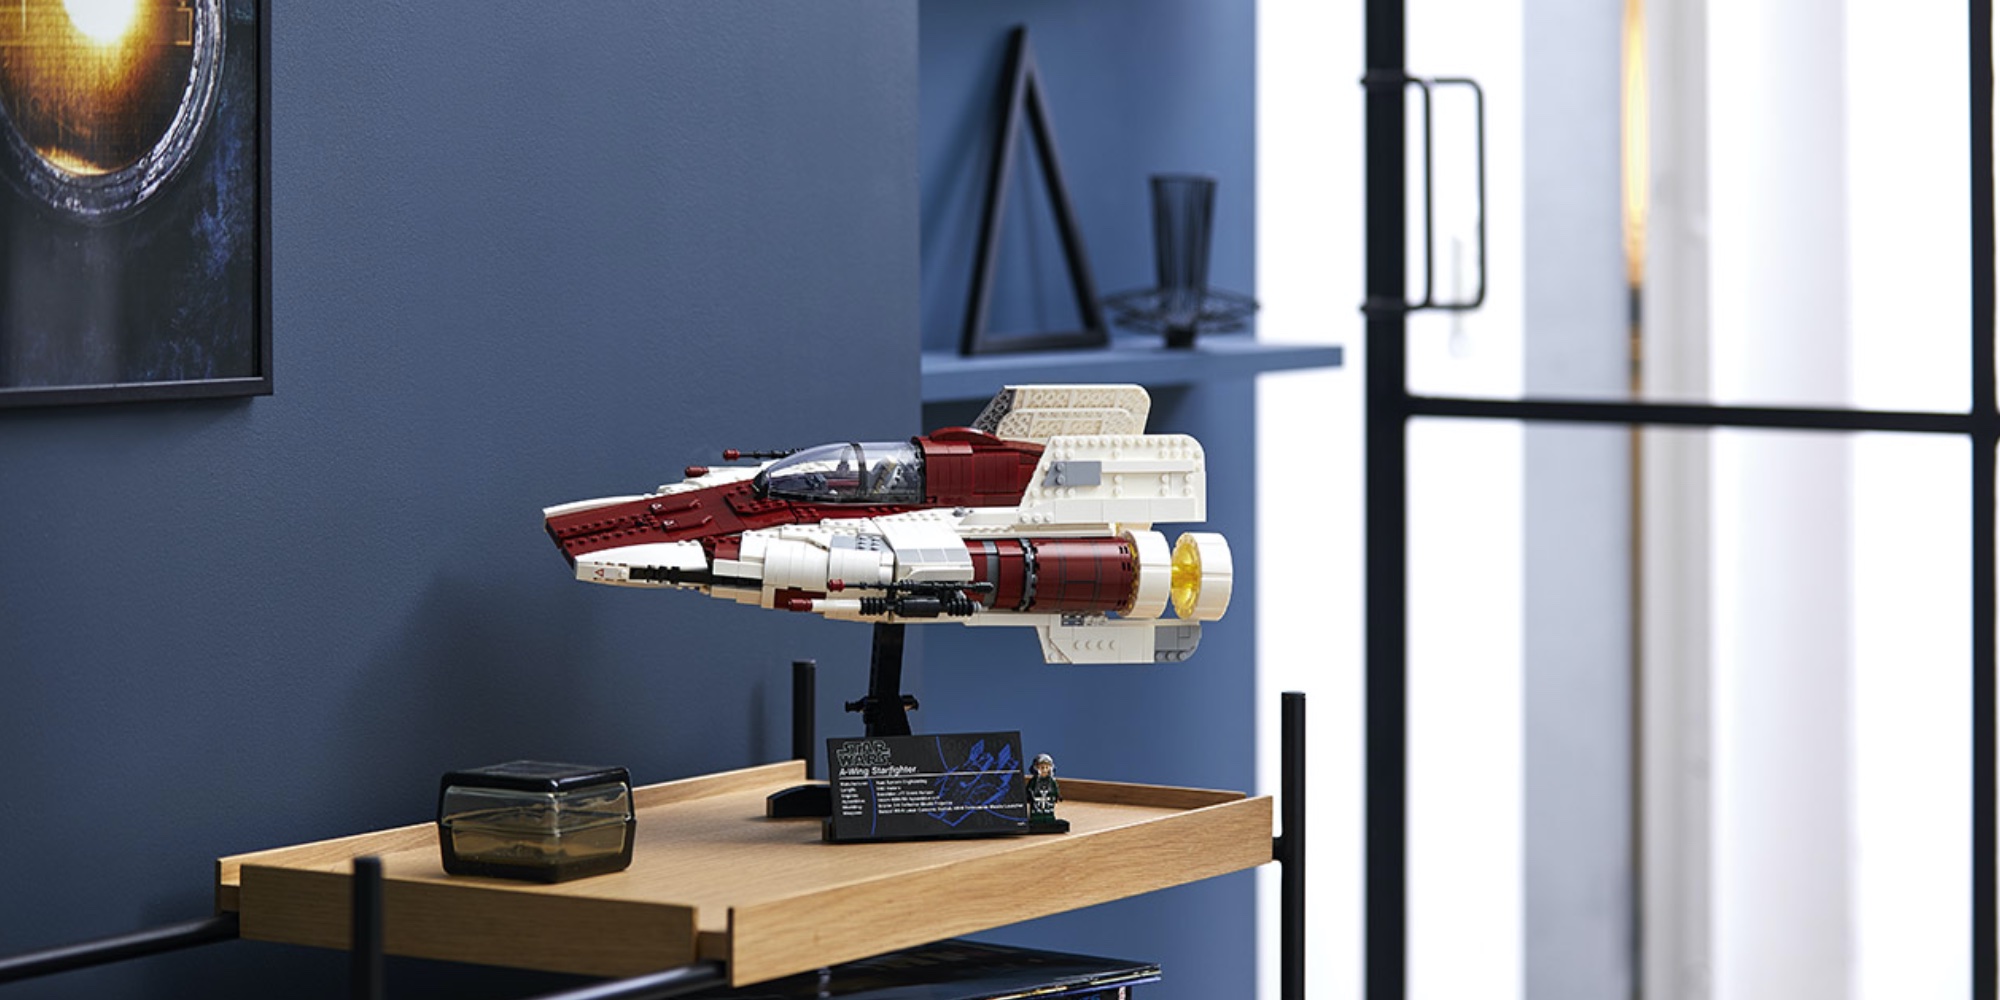 LEGO UCS A-Wing joins Star Wars theme with 1,670-pieces - 9to5Toys